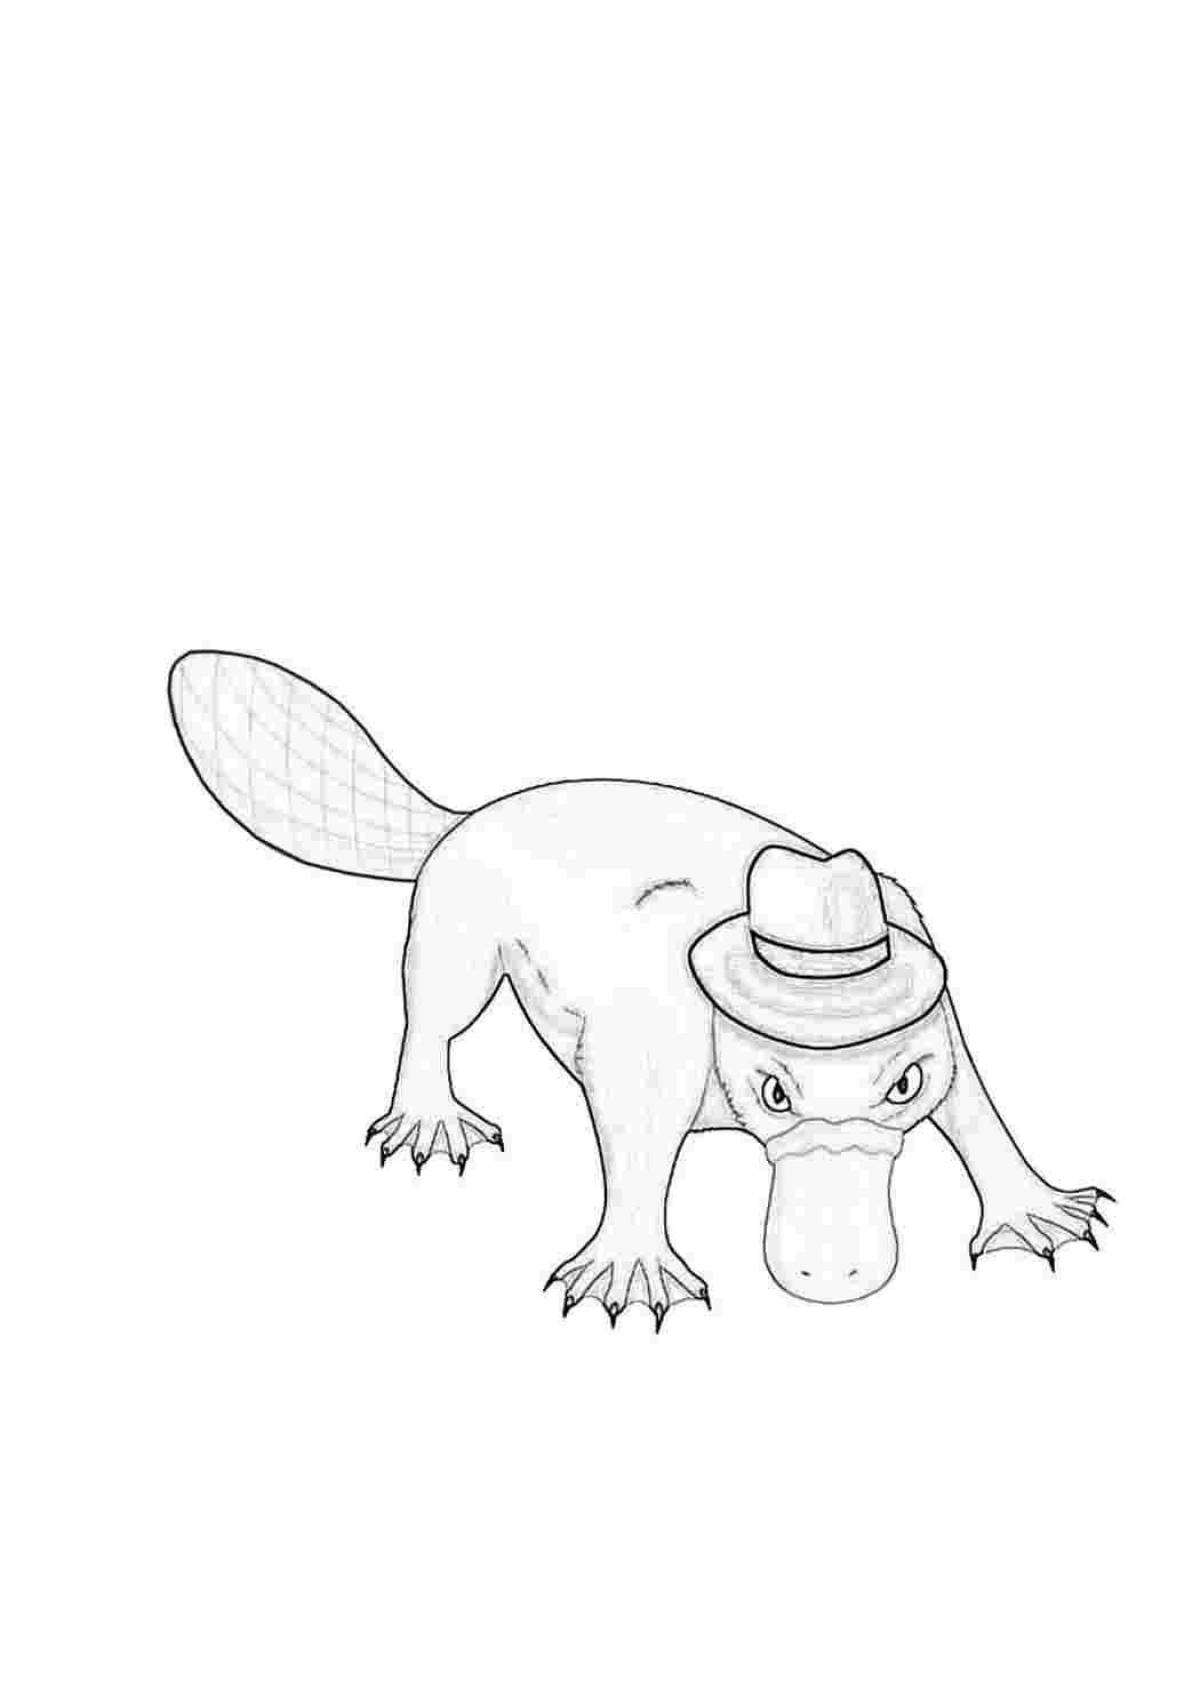 A fun platypus coloring book for kids